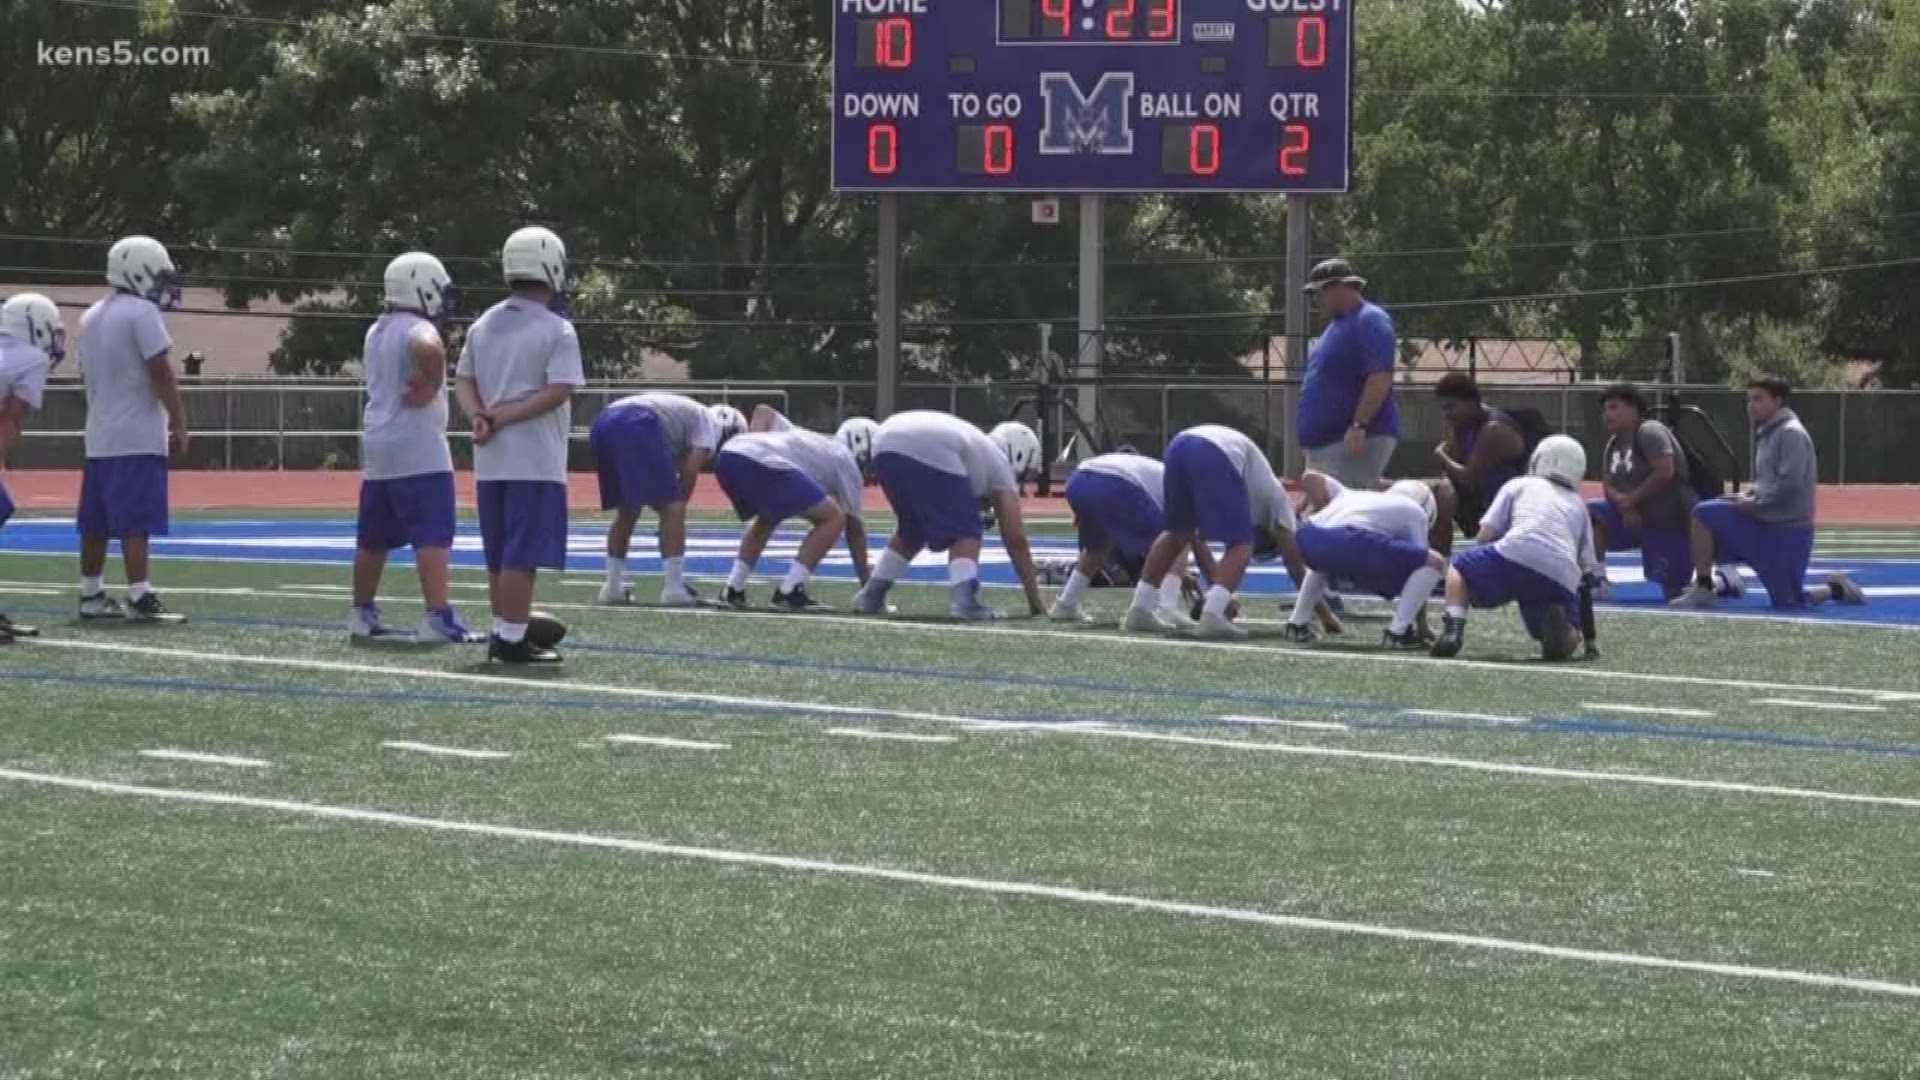 The heat is on as students across San Antonio hit the field for the beginning of another high school football season. Eyewitness News reporter Jeremy Baker has more.